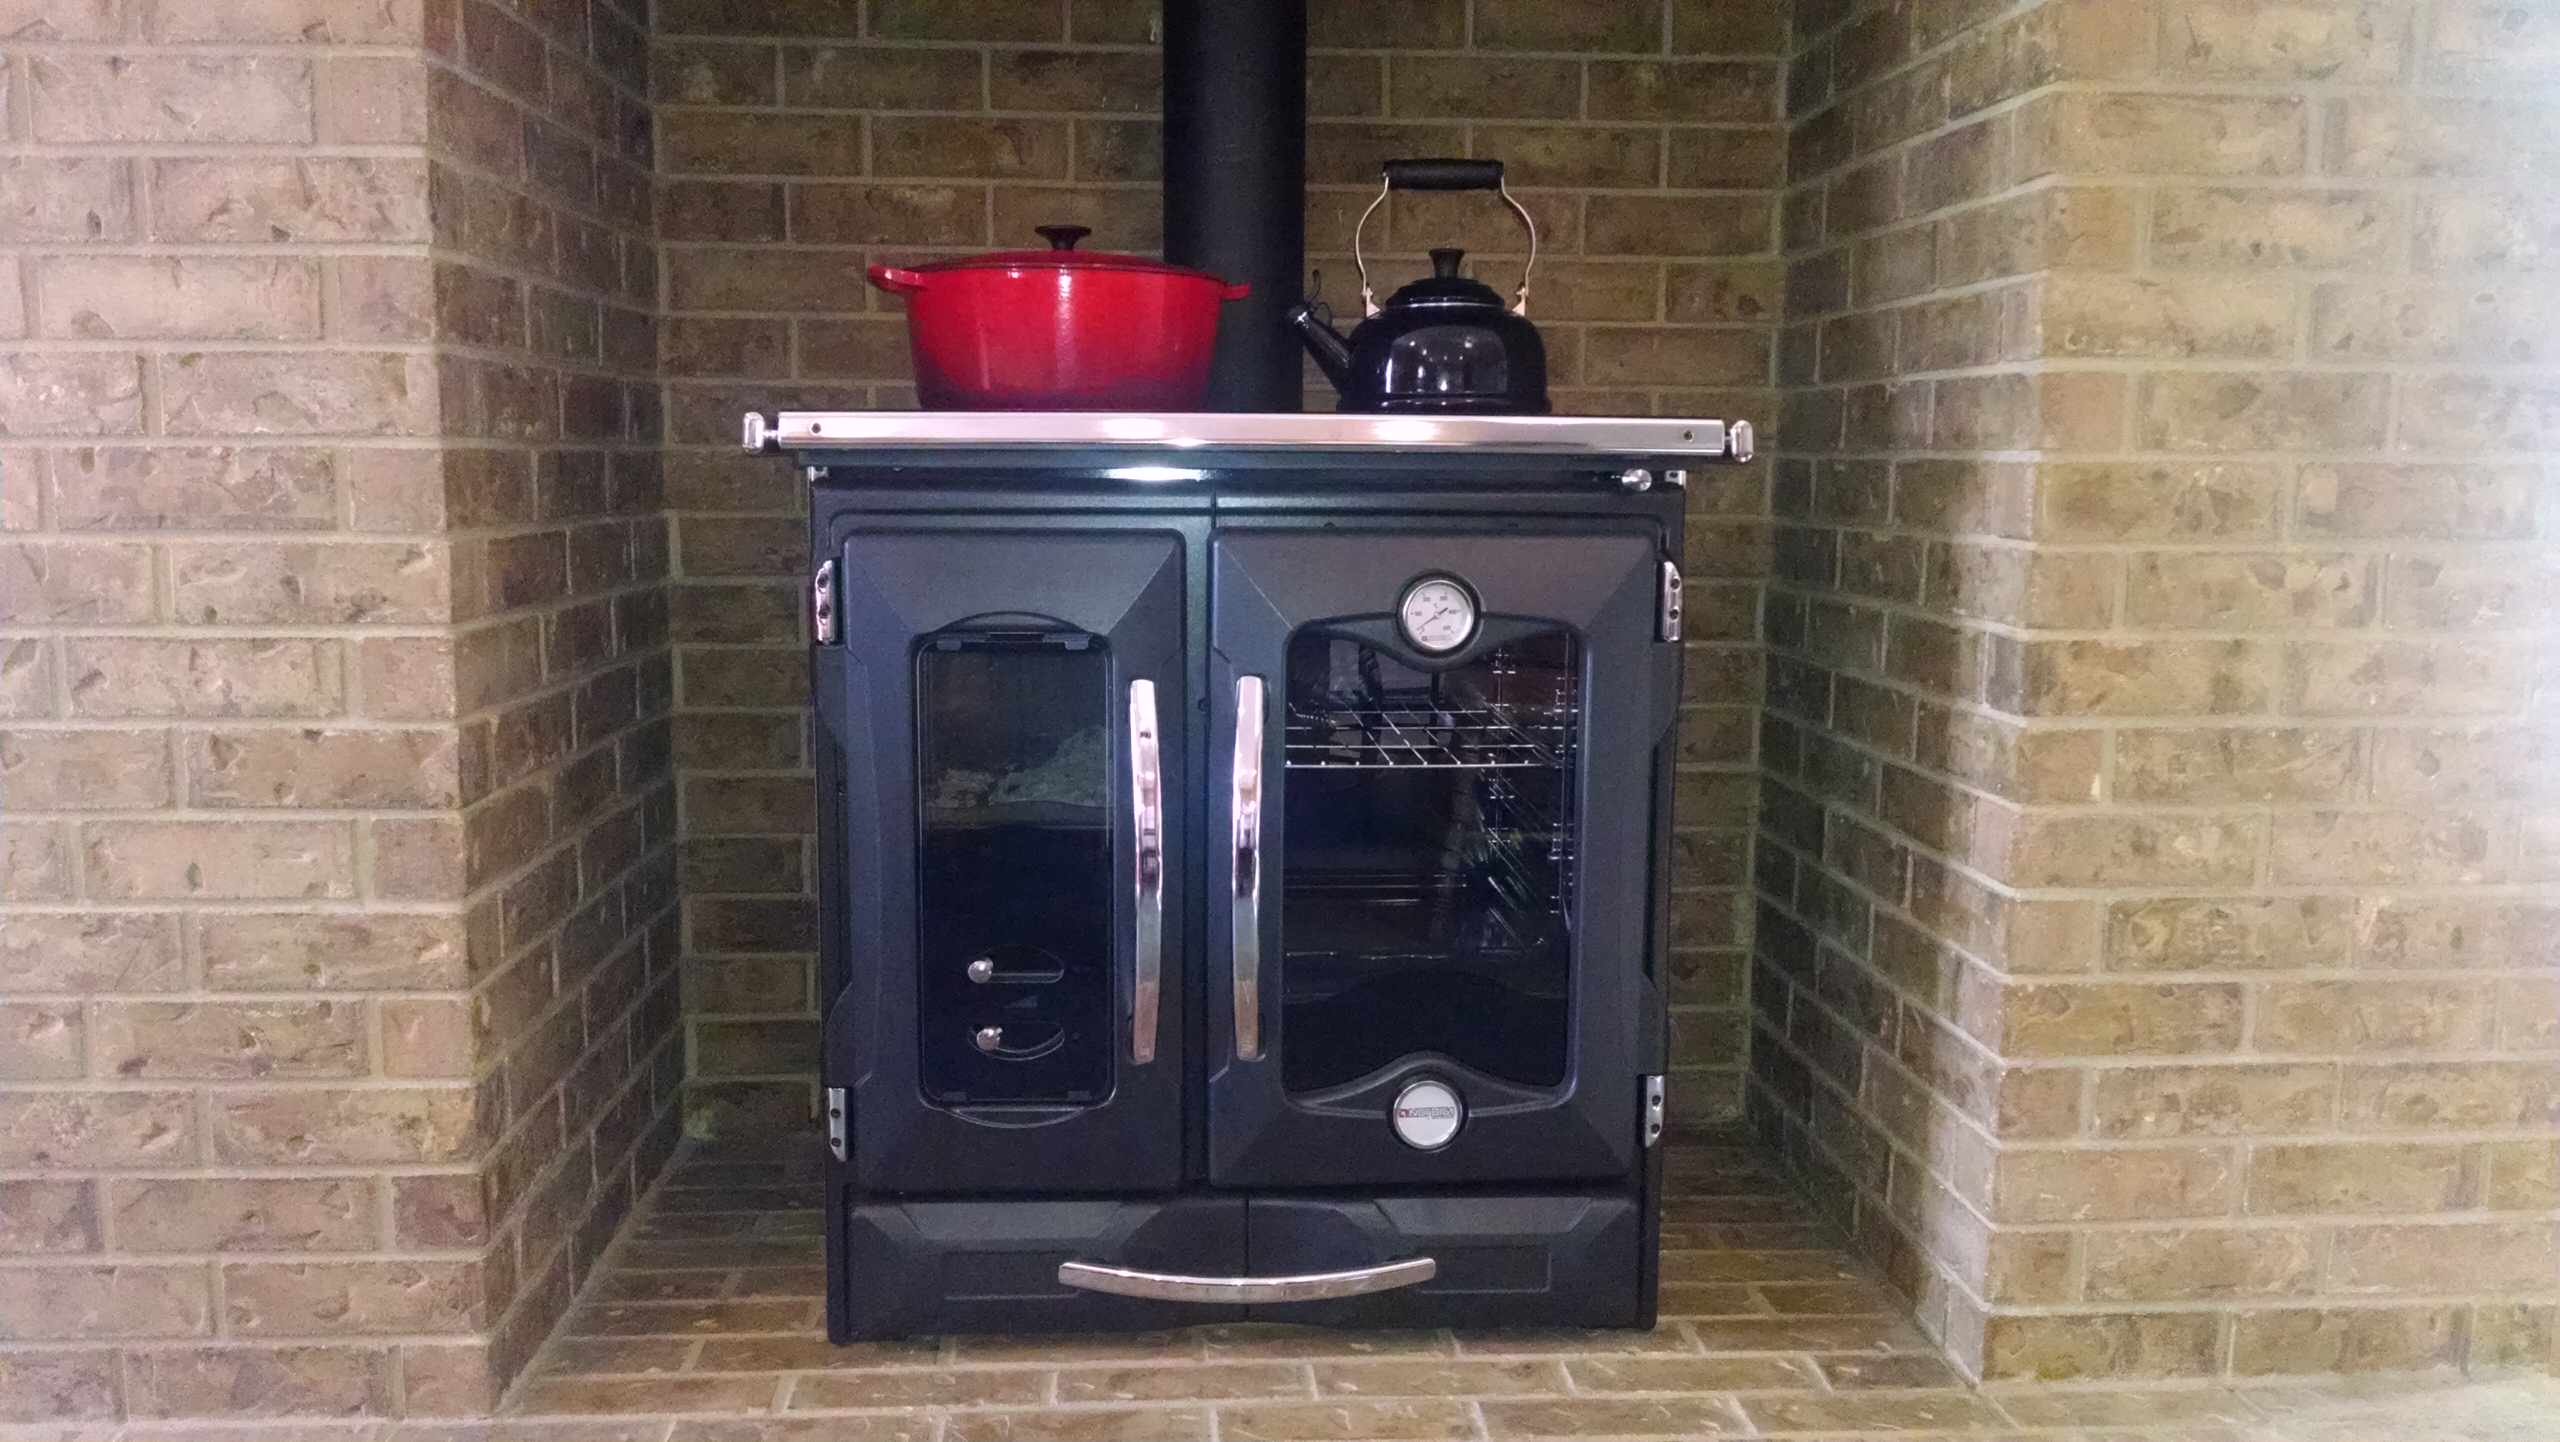 Wood Burning Cooking Stove by La Nordica, Wood Fired Cooking & Baking -  Rustic - Family Room - New York - by Grills'n Ovens LLC | Houzz